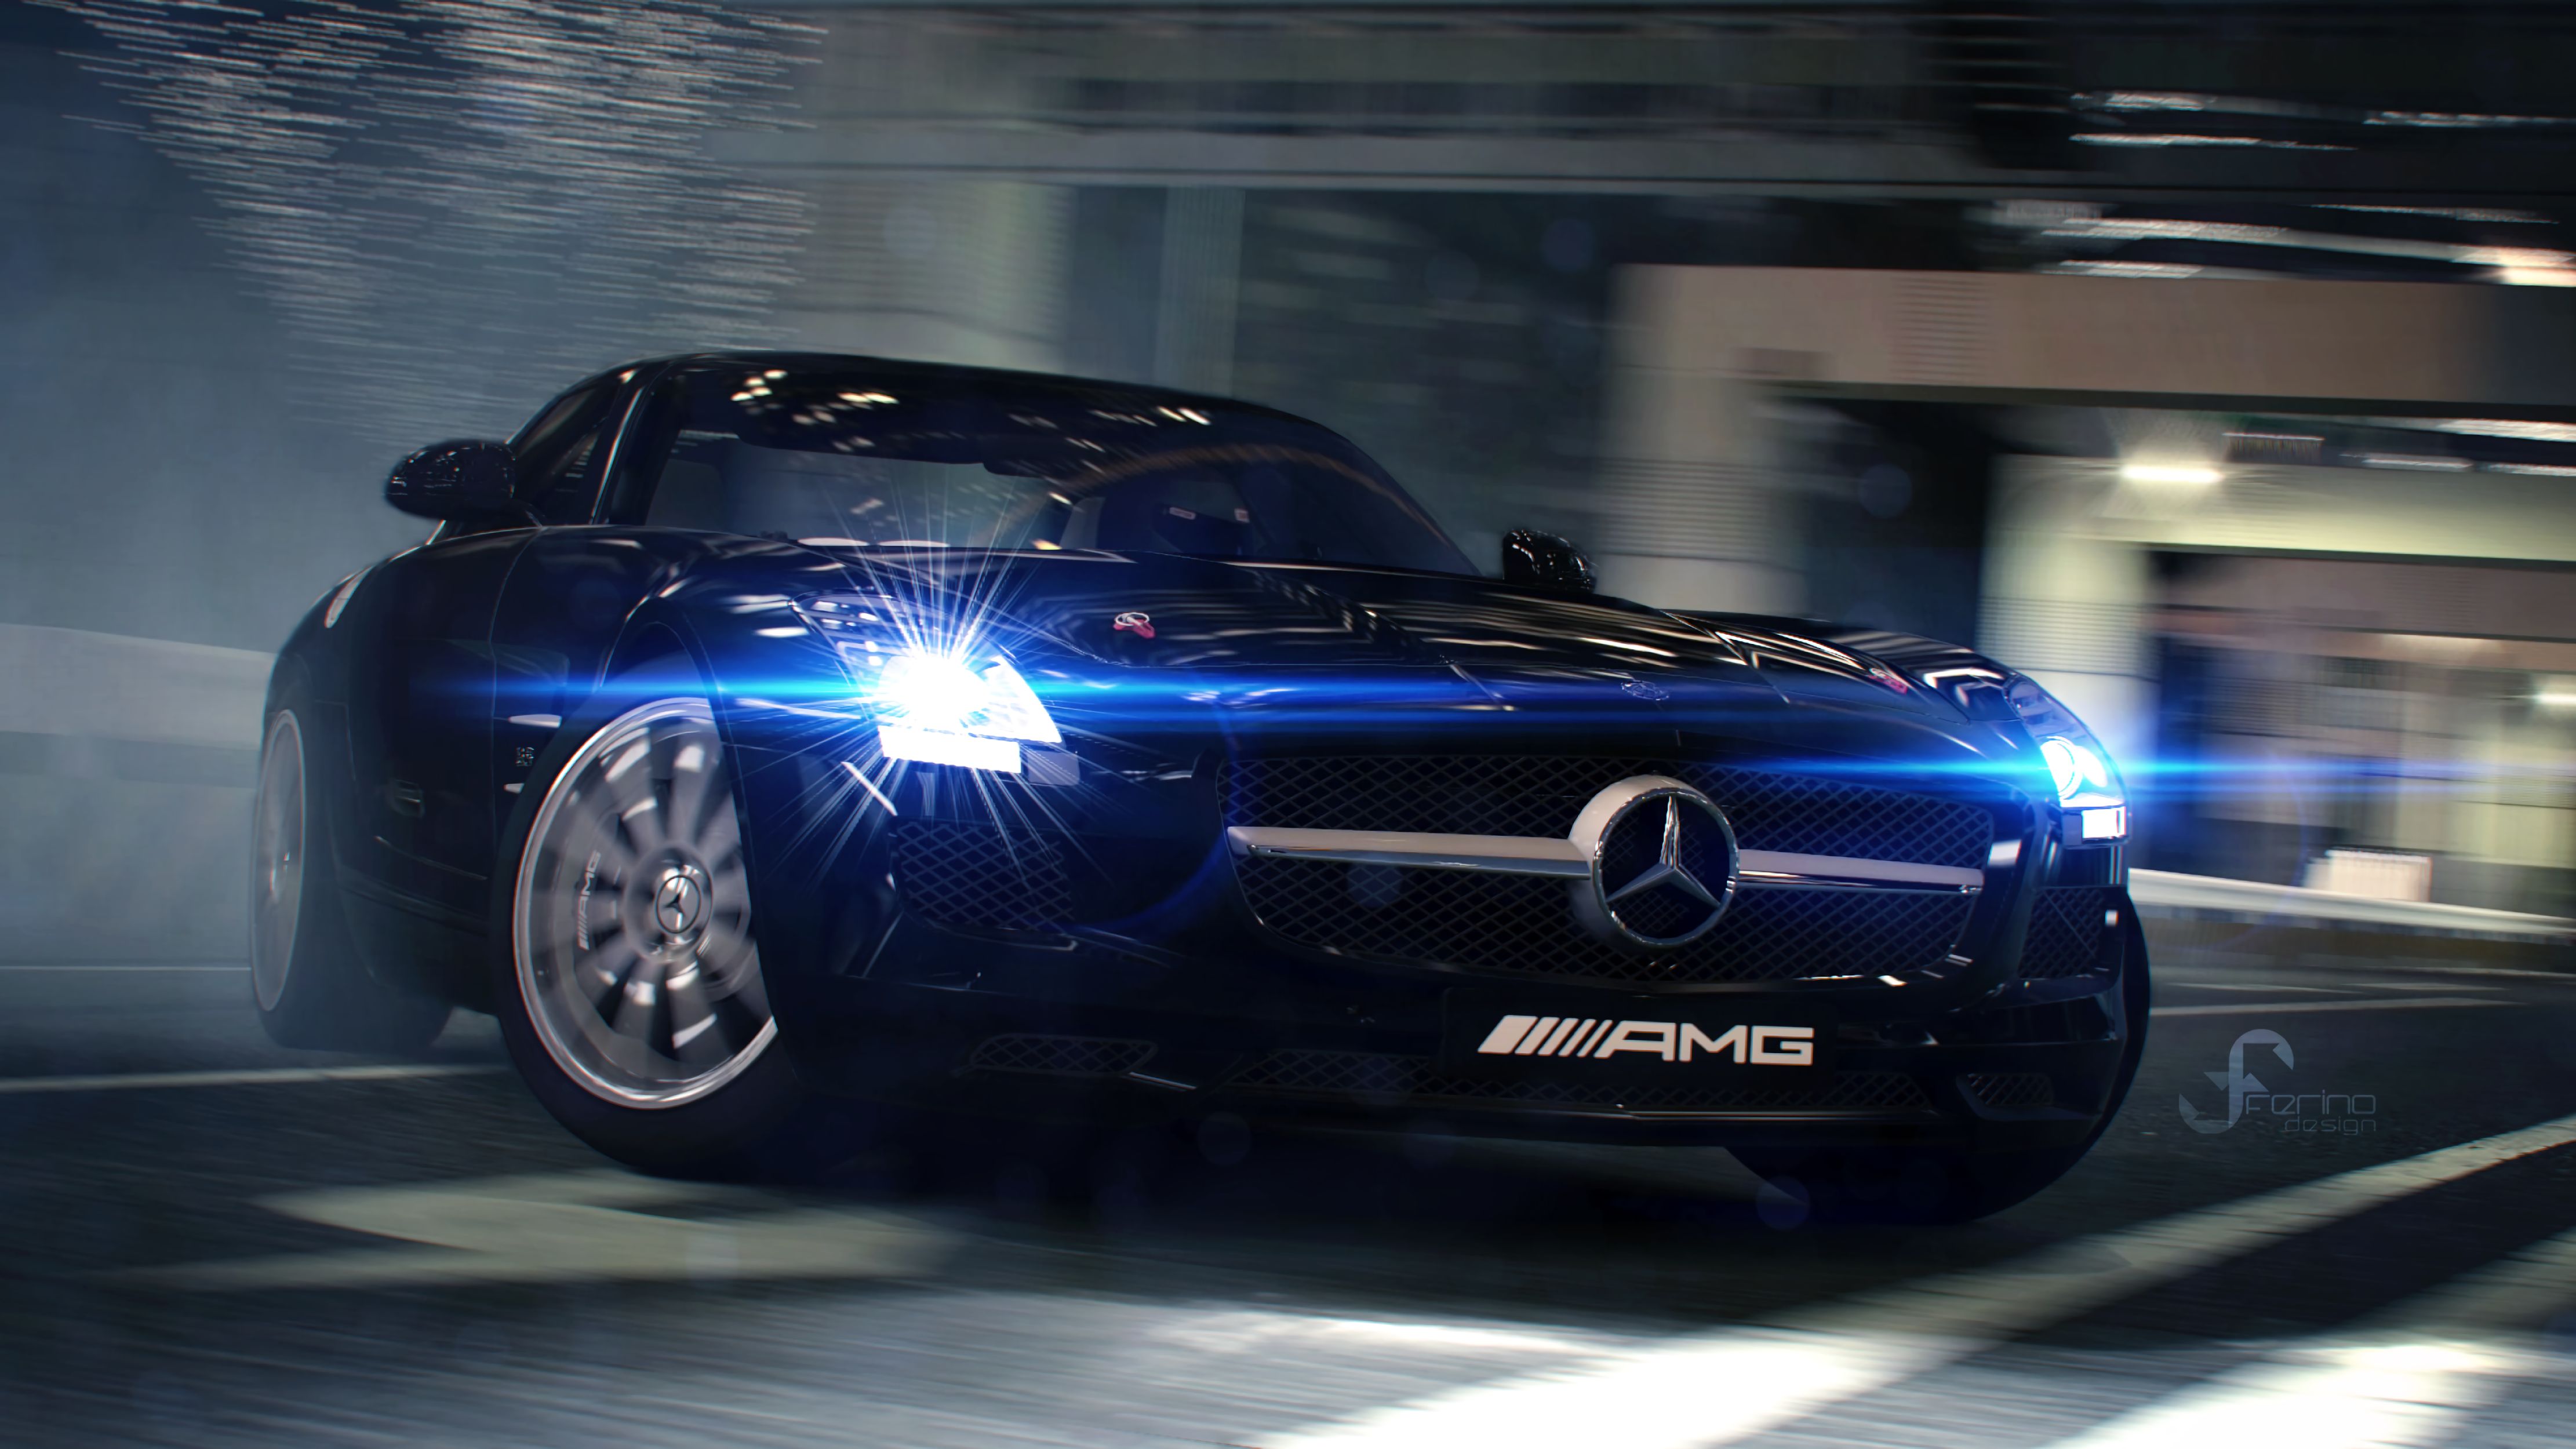 111435 download wallpaper sports, cars, sports car, amg, mercedes, race, mercedes-amg screensavers and pictures for free